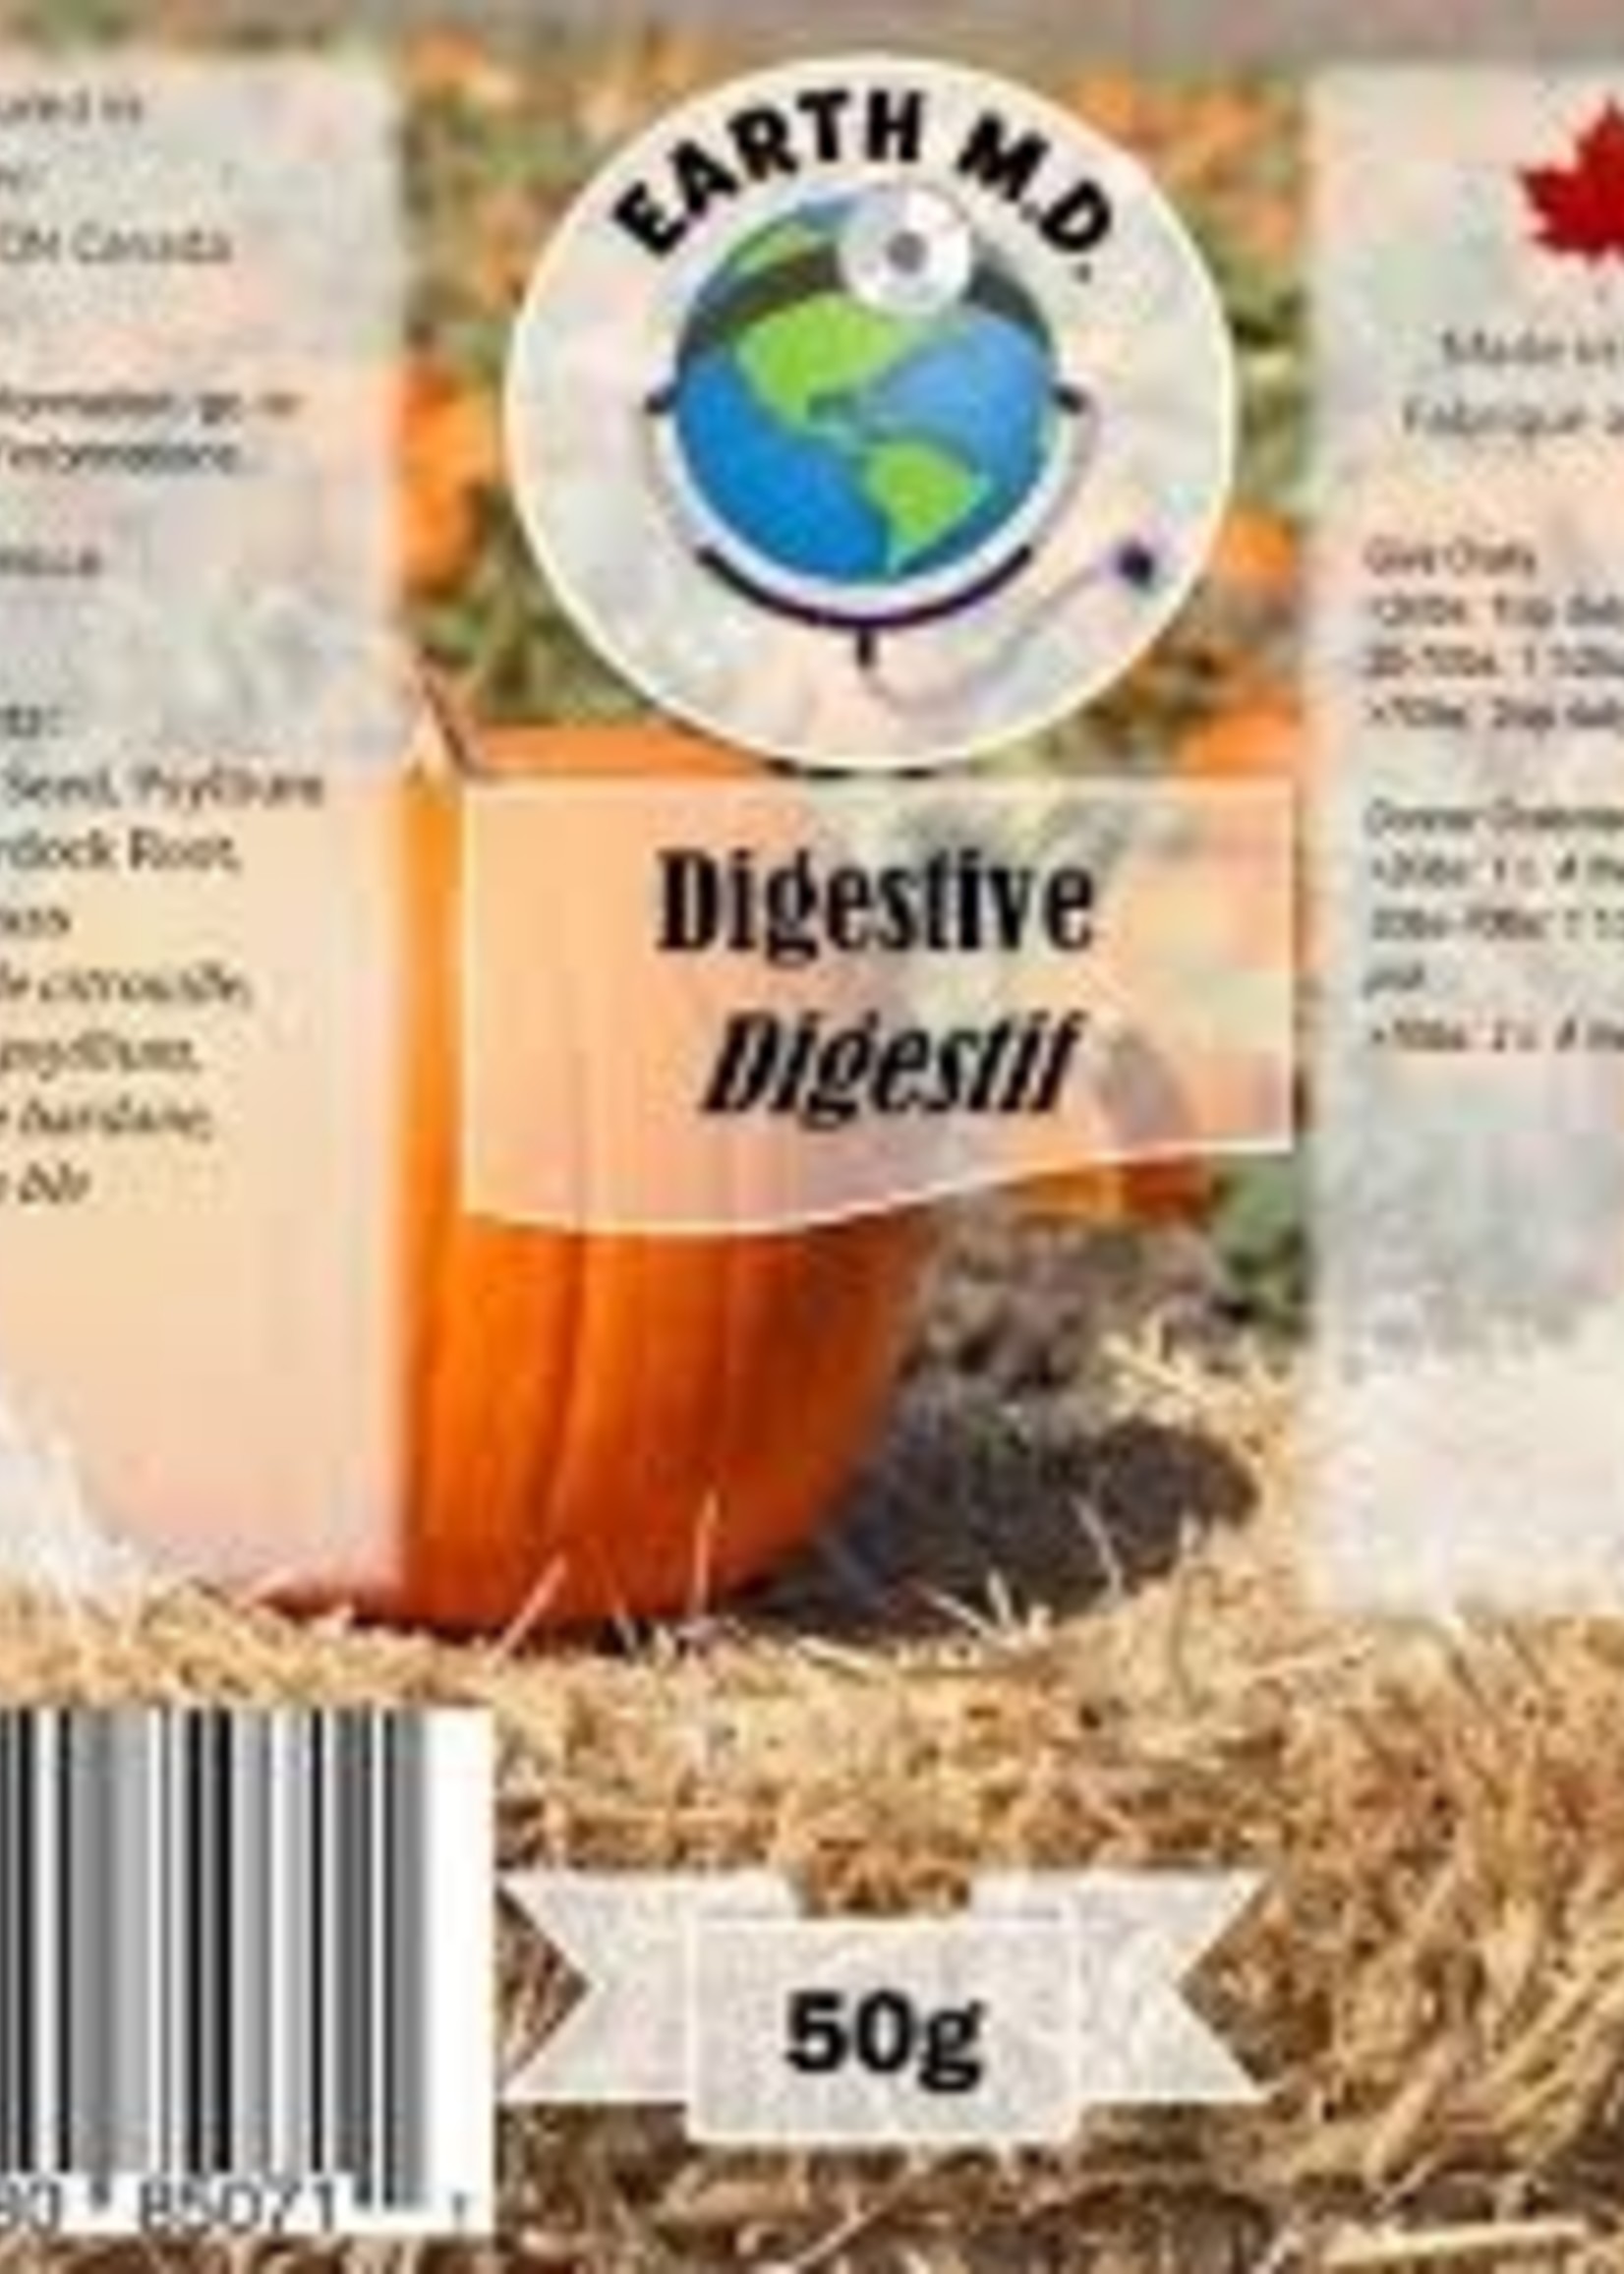 Earth MD Earth MD Digestive Care 50g